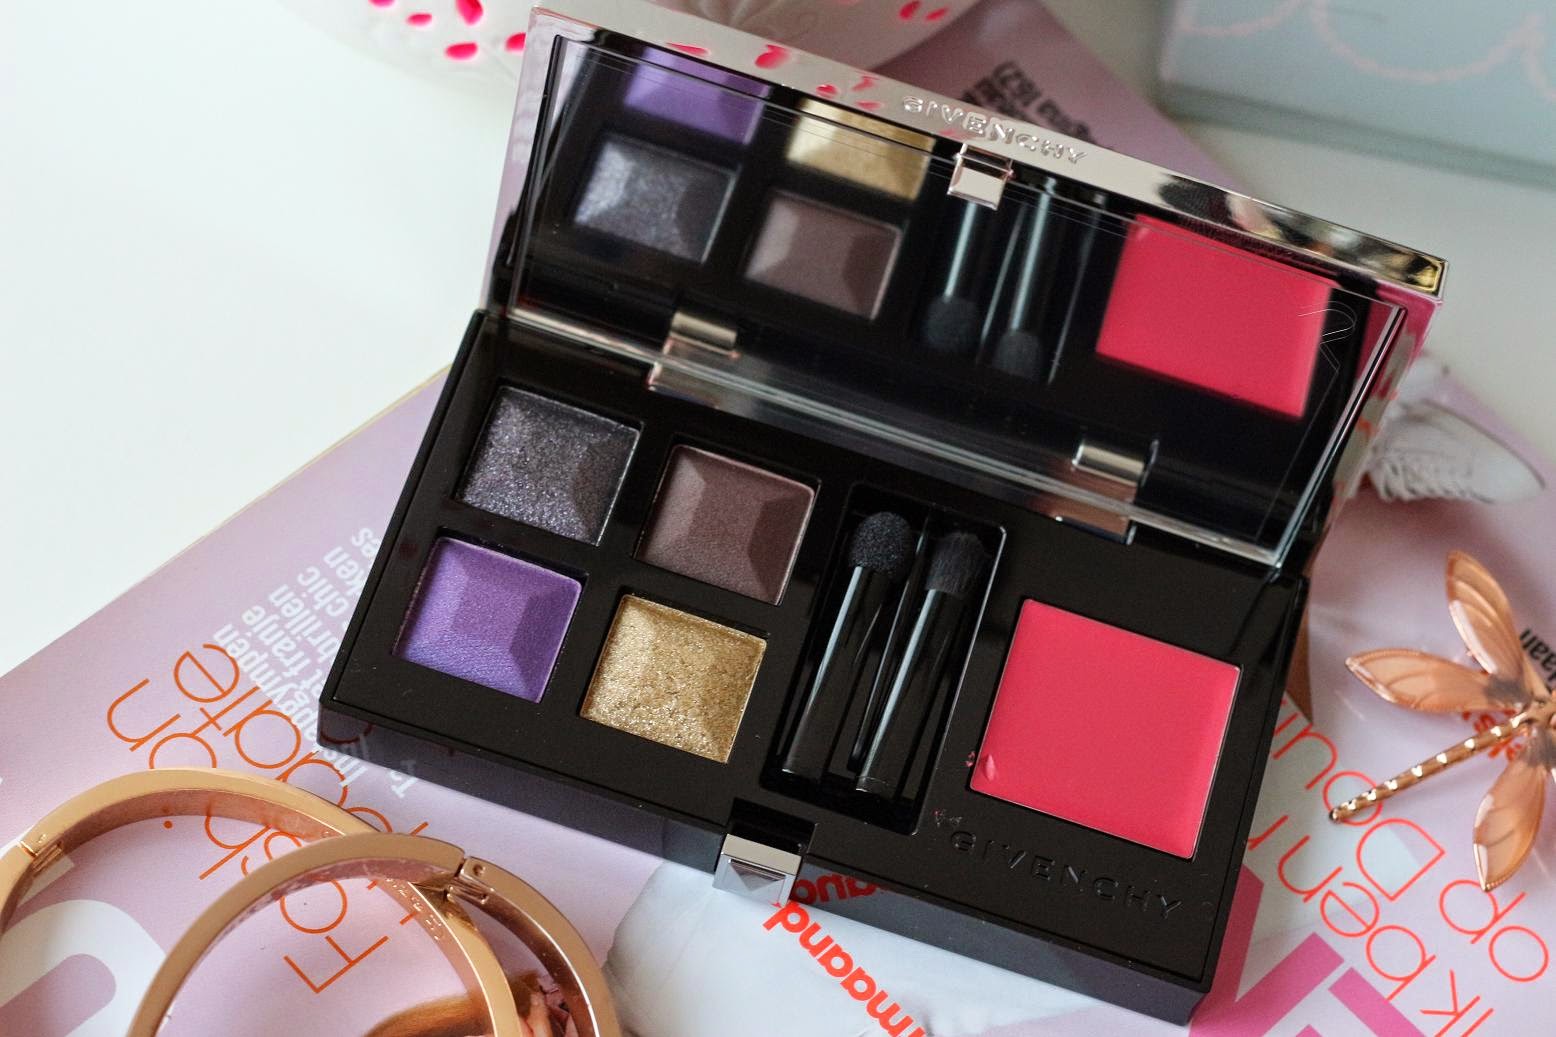 Givenchy Palette Extravagancia